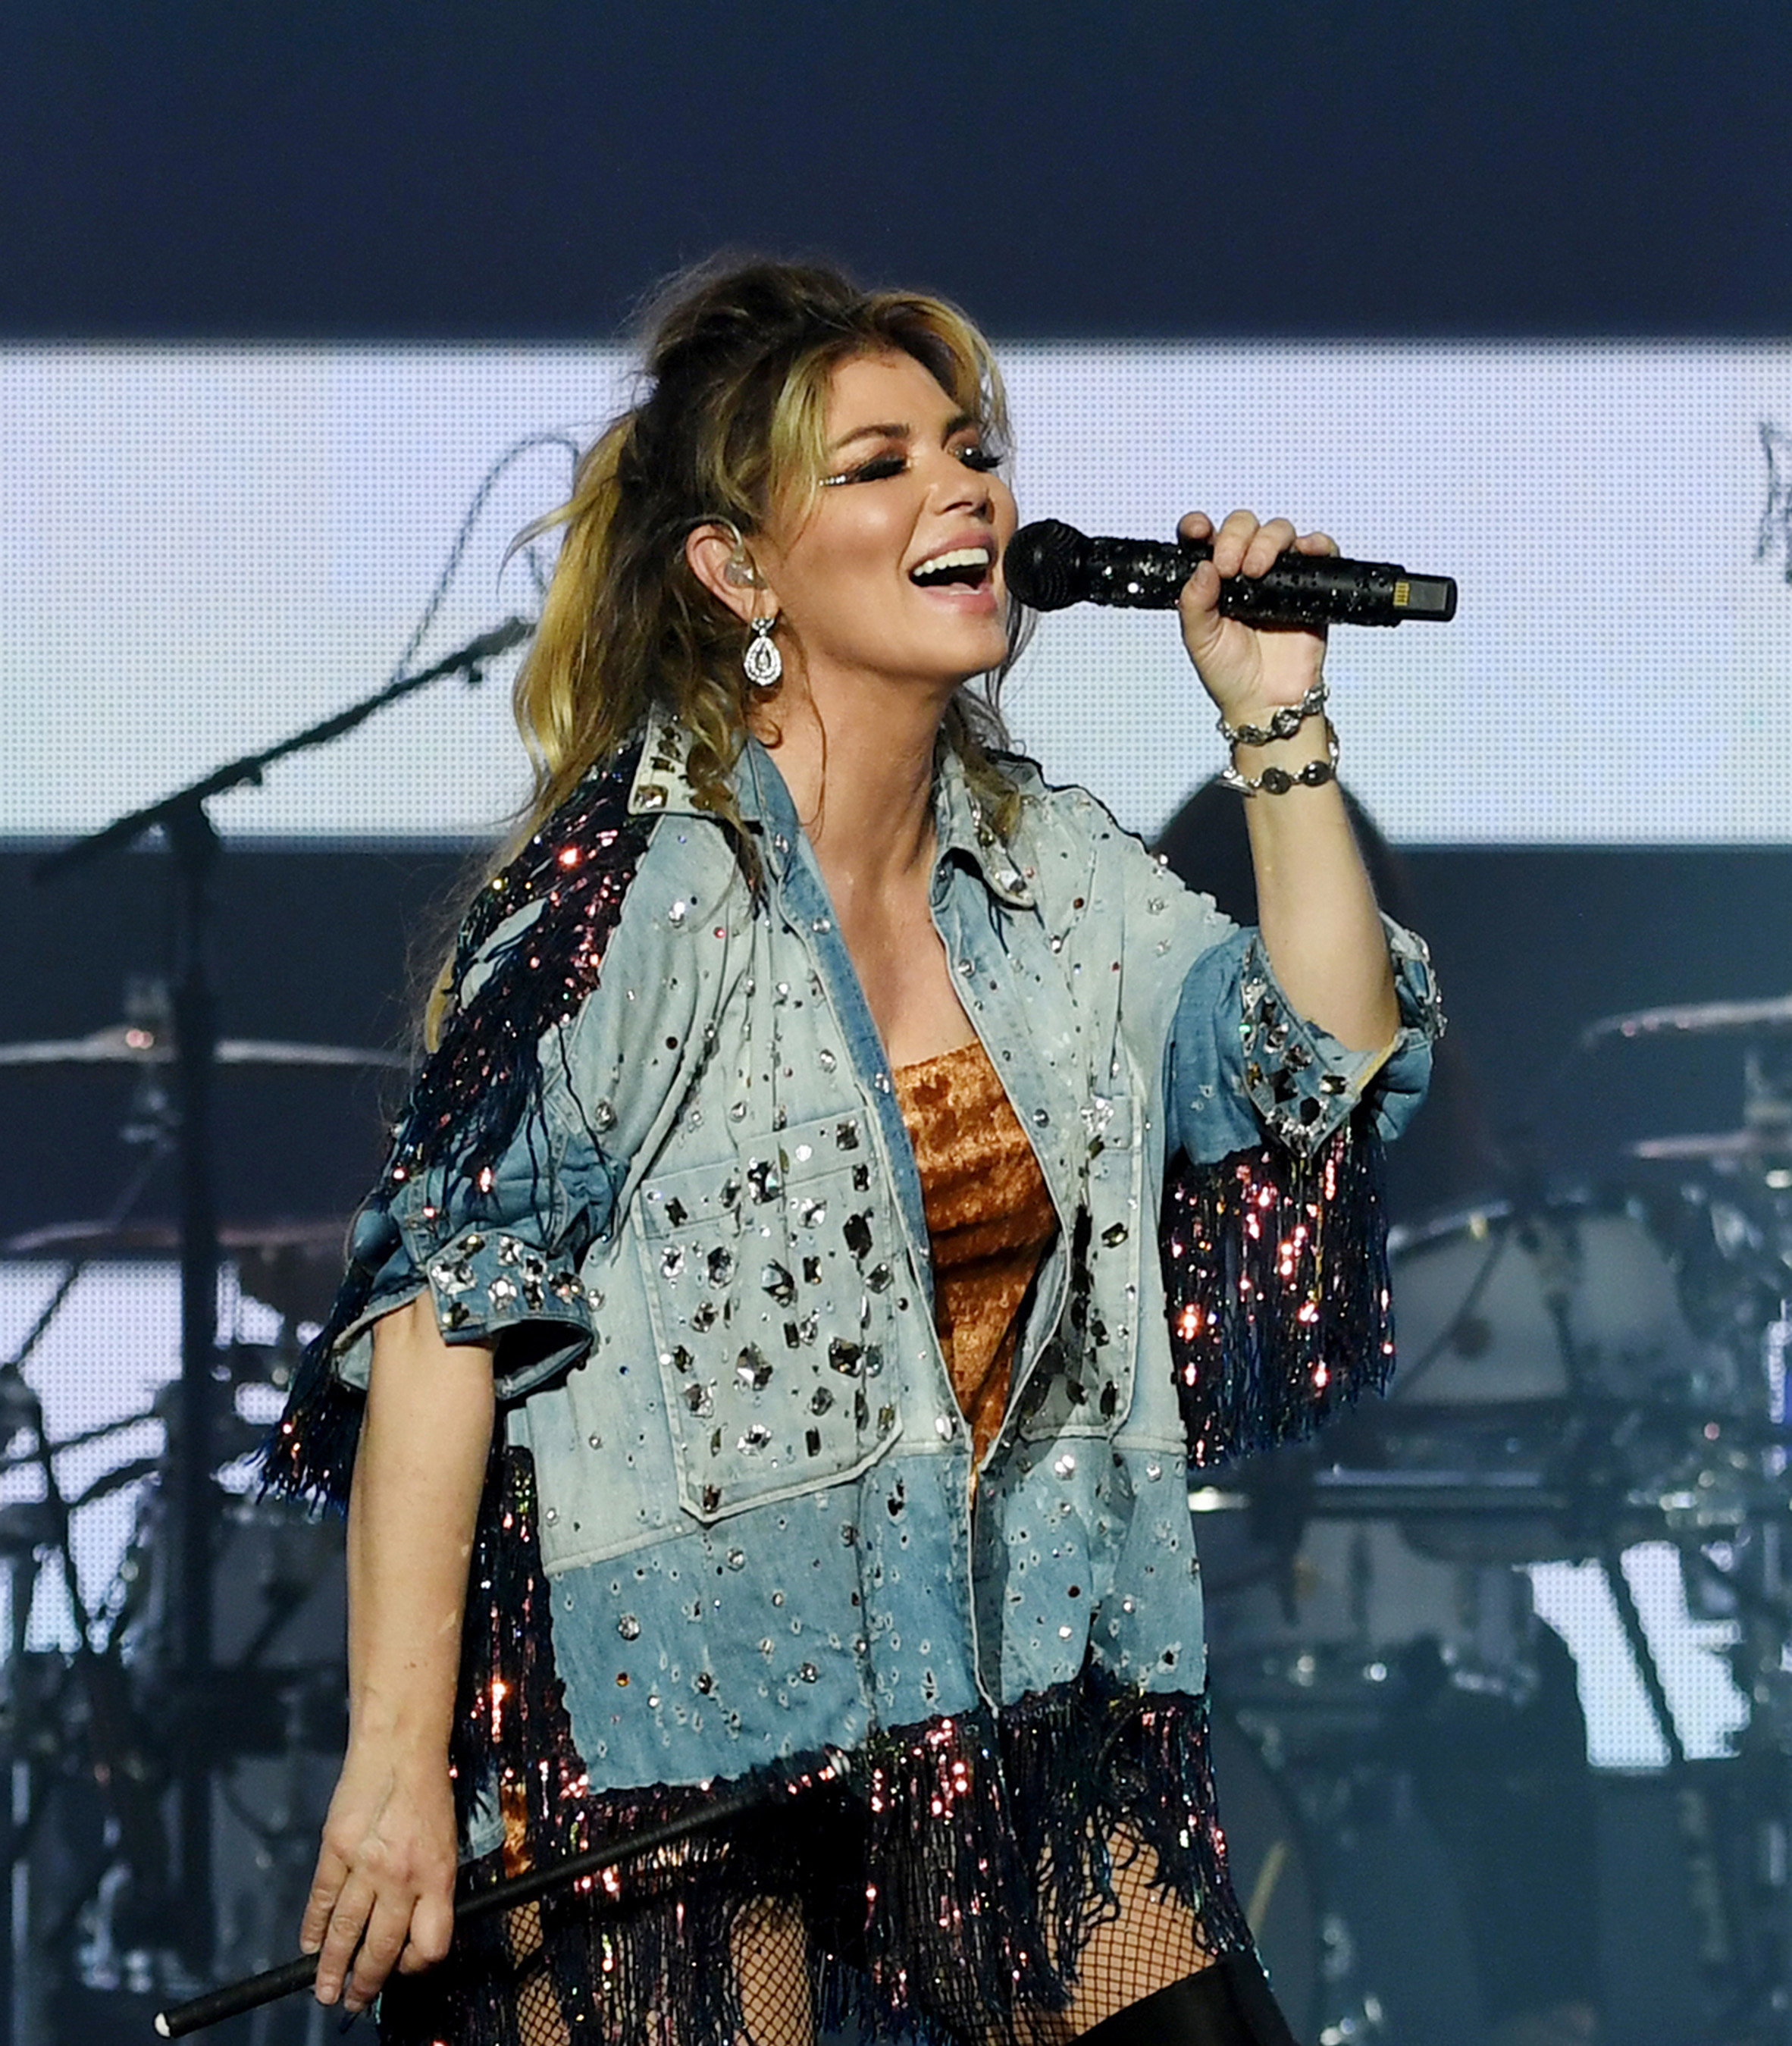 Global Icon Shania Twain Launches Shania Twain â€œLetâ€™s Go!â€� The Las Vegas Residency To Sold-out Crowds Opening Week At Zappos Theater At Planet Hollywood Resort & Casino